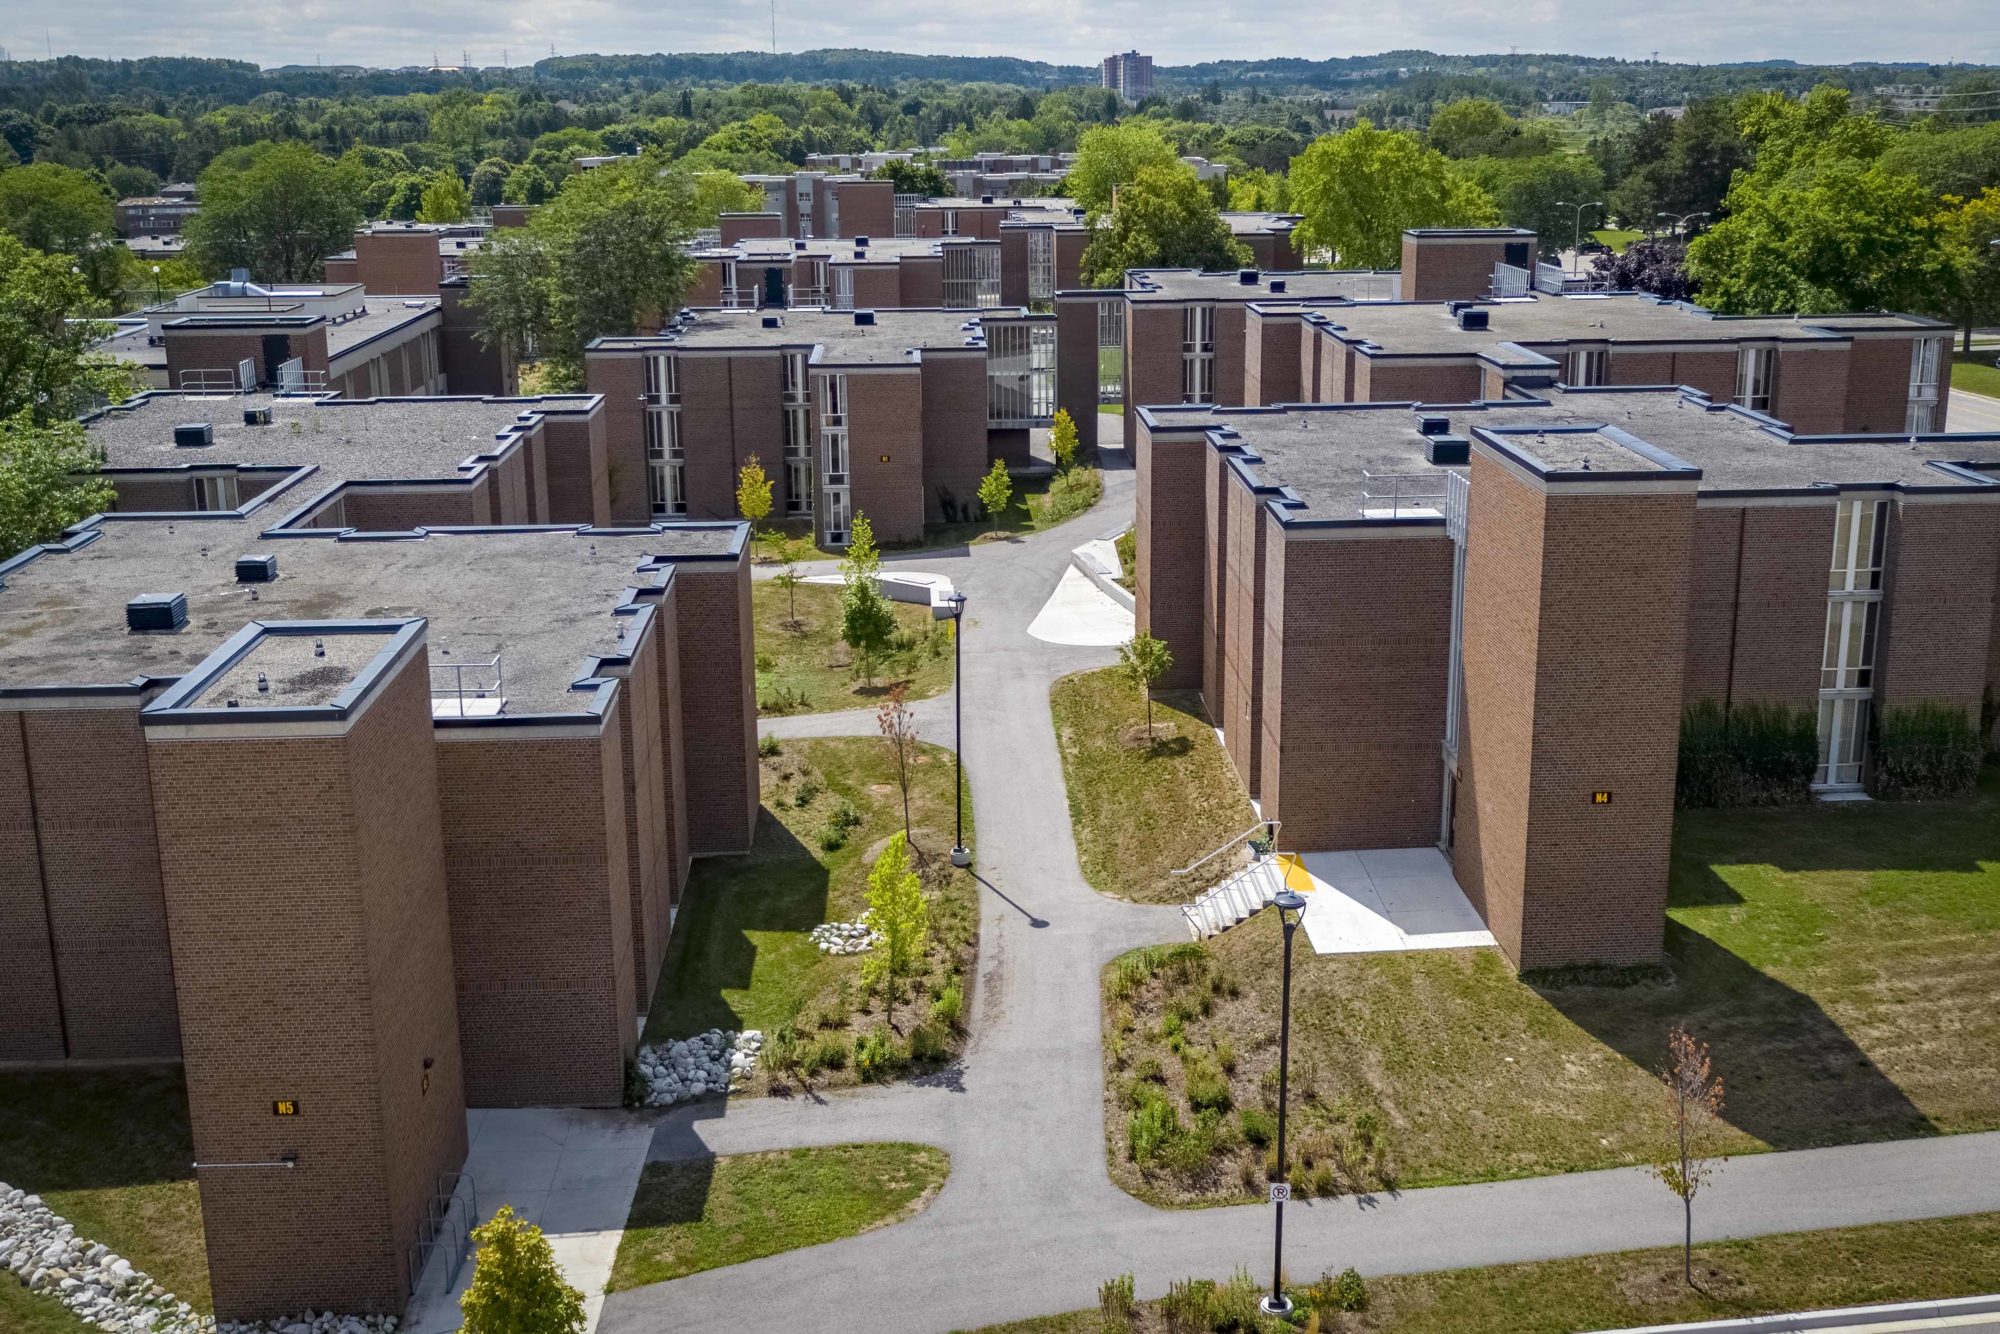 Aerial view of a cluster of student residential buildings on the grounds of the University of Waterloo.